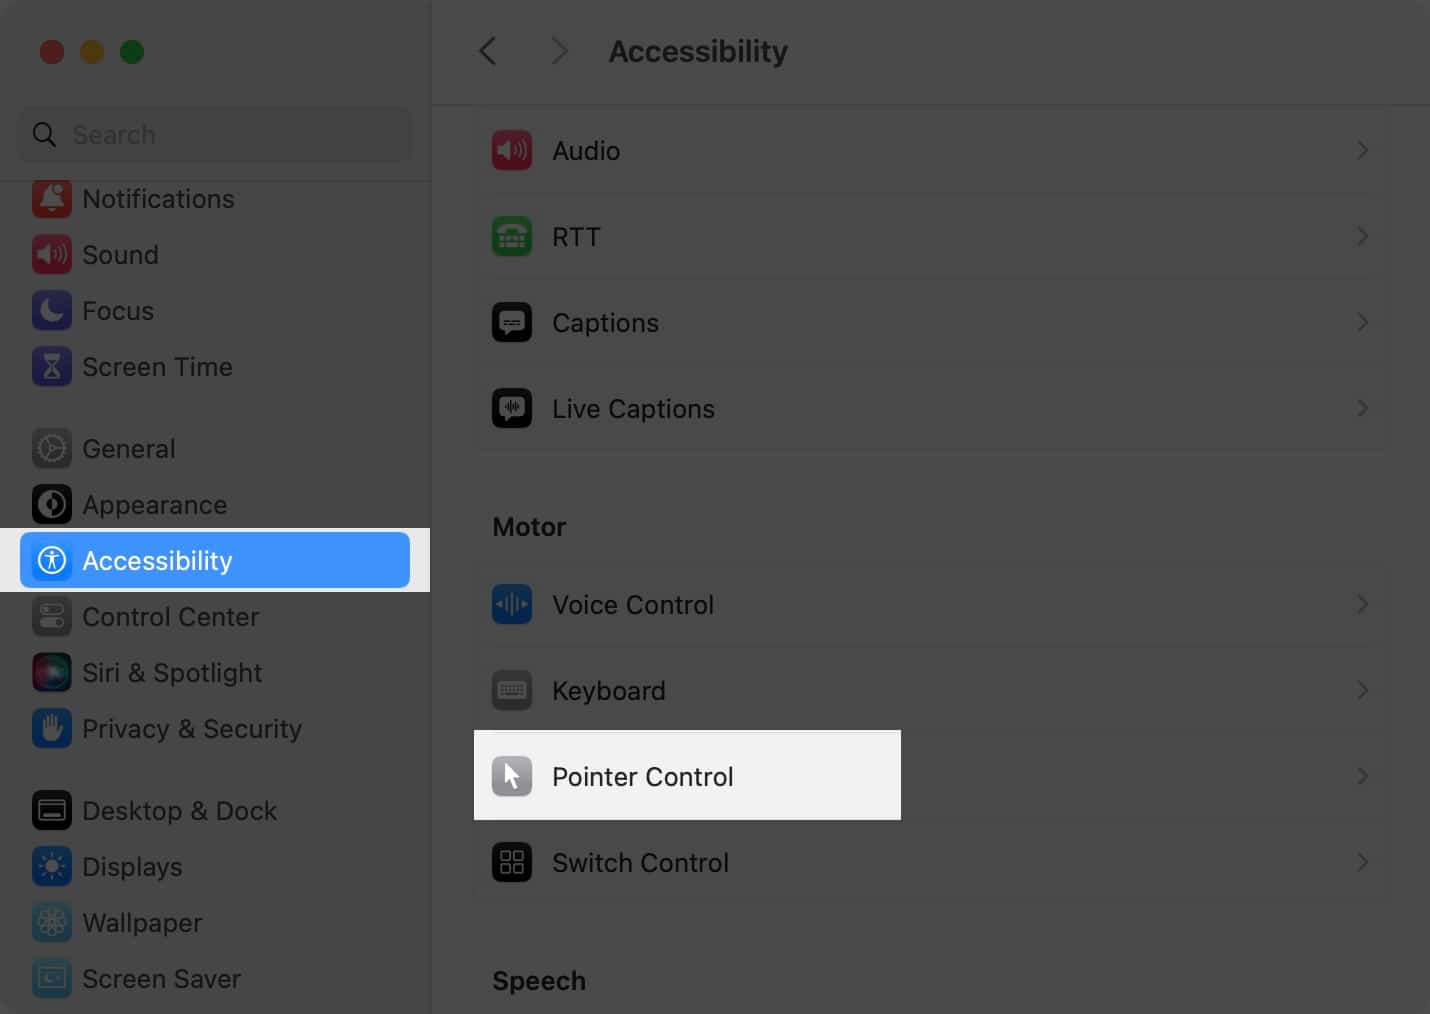 Pointer Control under Accessibility in System Settings